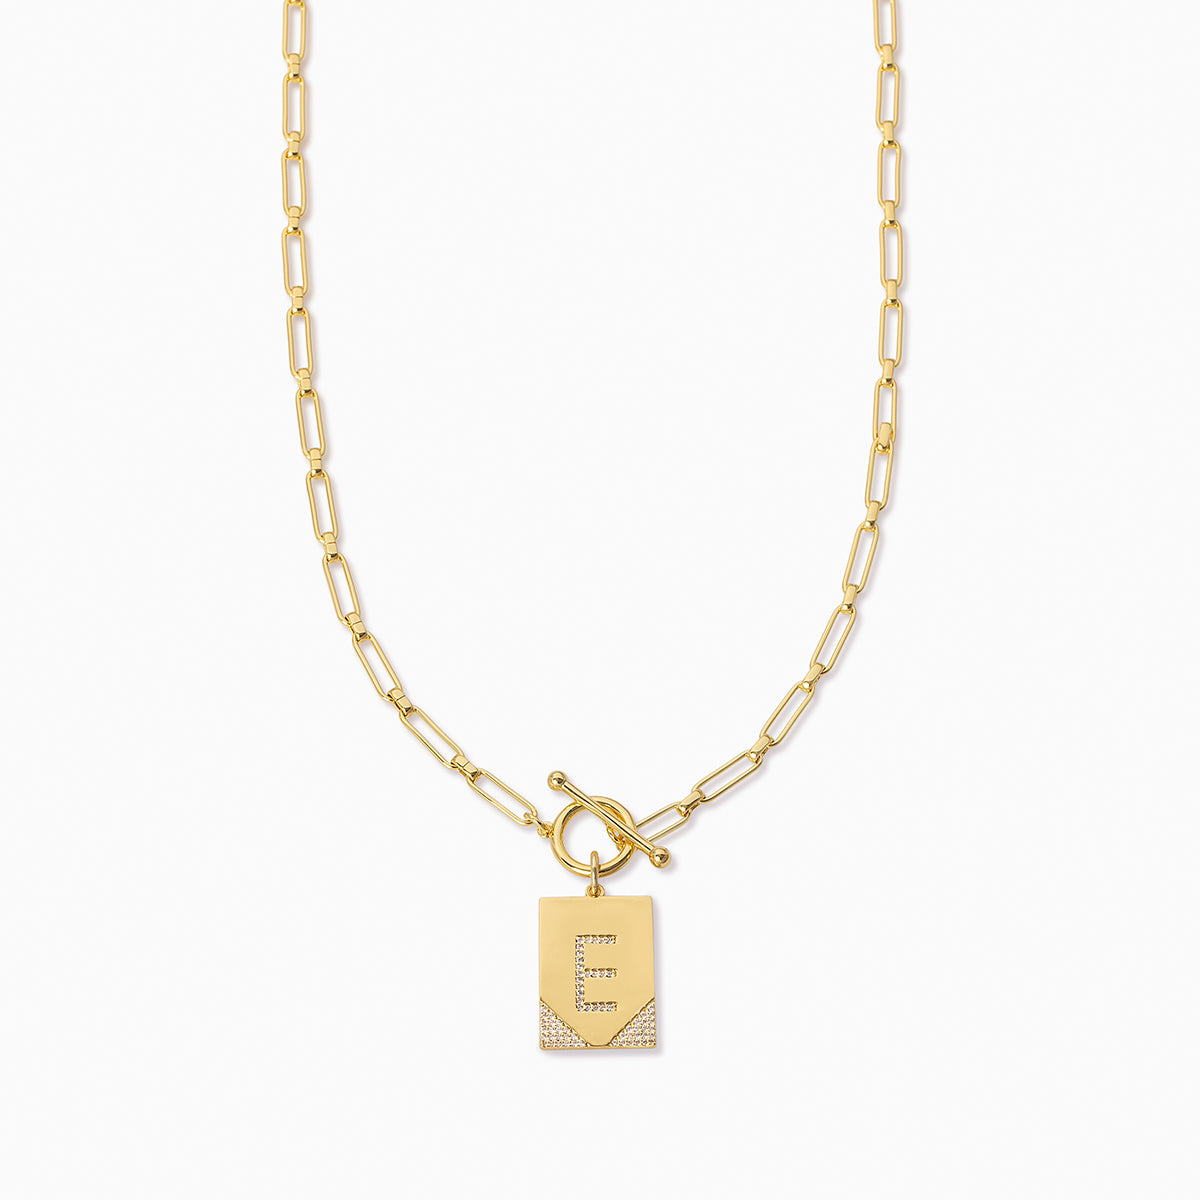 Leave Your Mark Chain Necklace | Gold  E | Product Image | Uncommon James